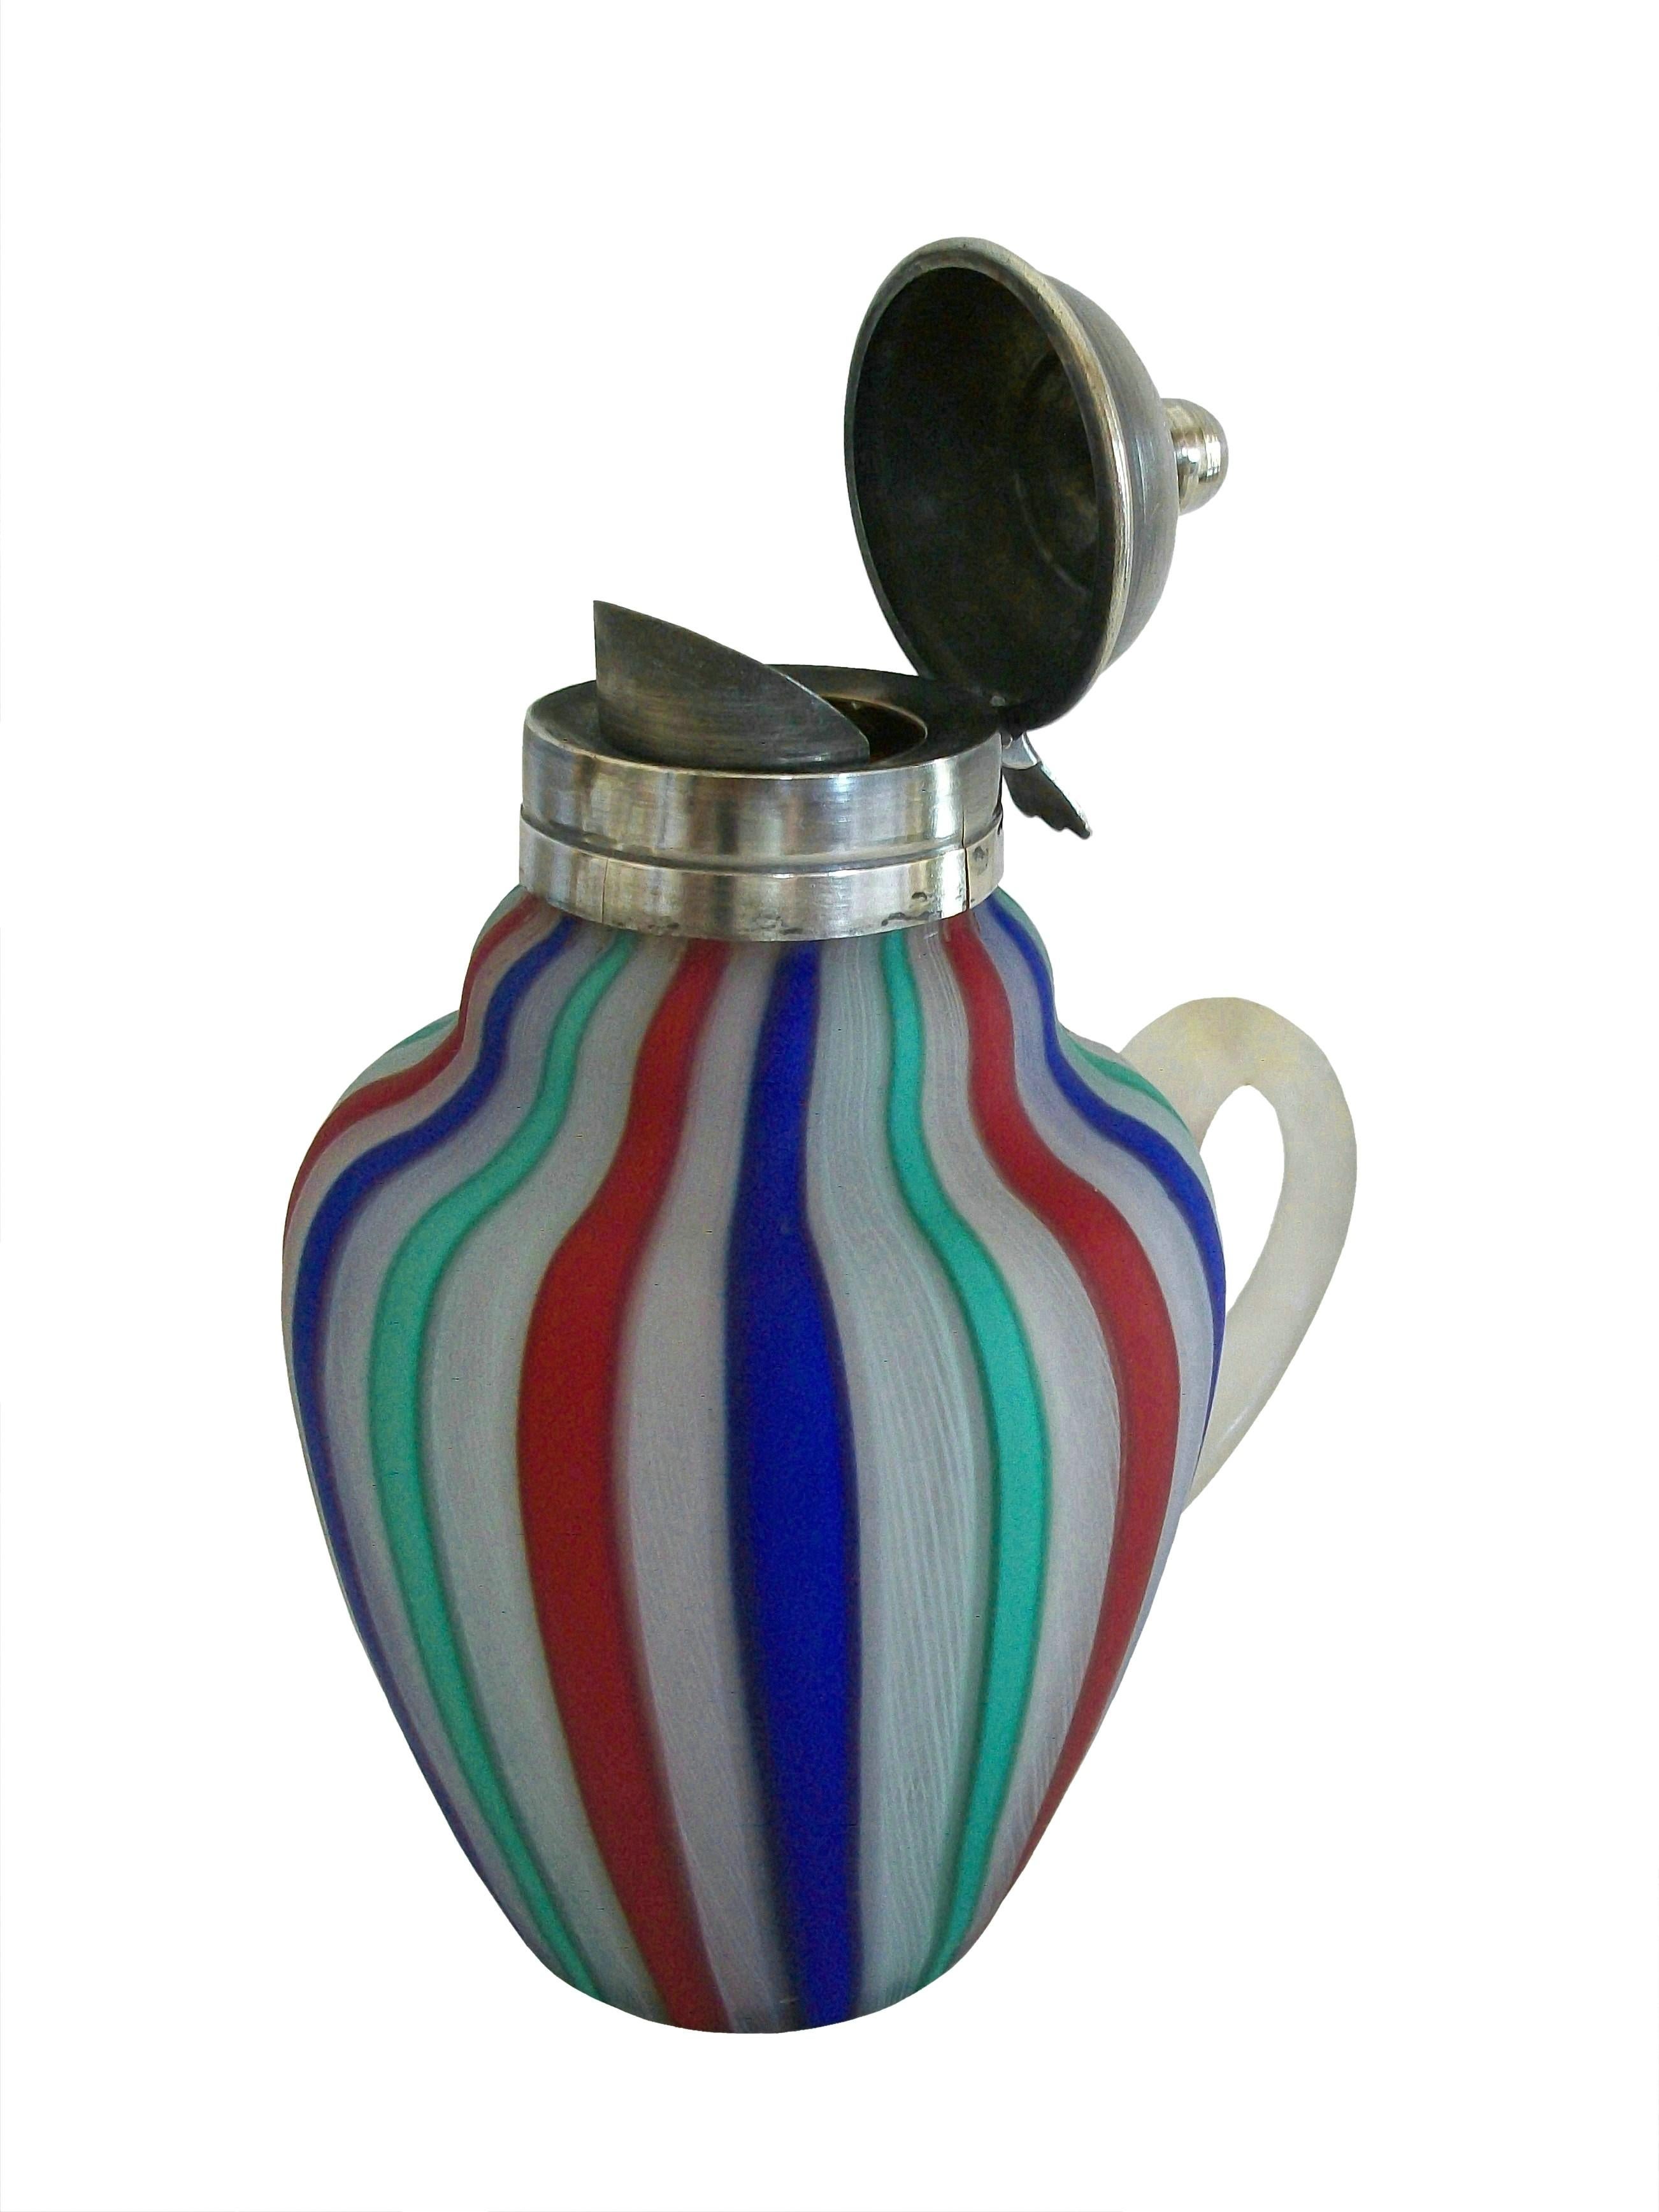 FRATELLI TOSO - Rare antique Murano art glass Latticino syrup jug - striking red, white and blue and turquoise color combination - frosted / satin finish to the exterior - silver plate lid and rim with spring loaded hinge - clear satin glass handle